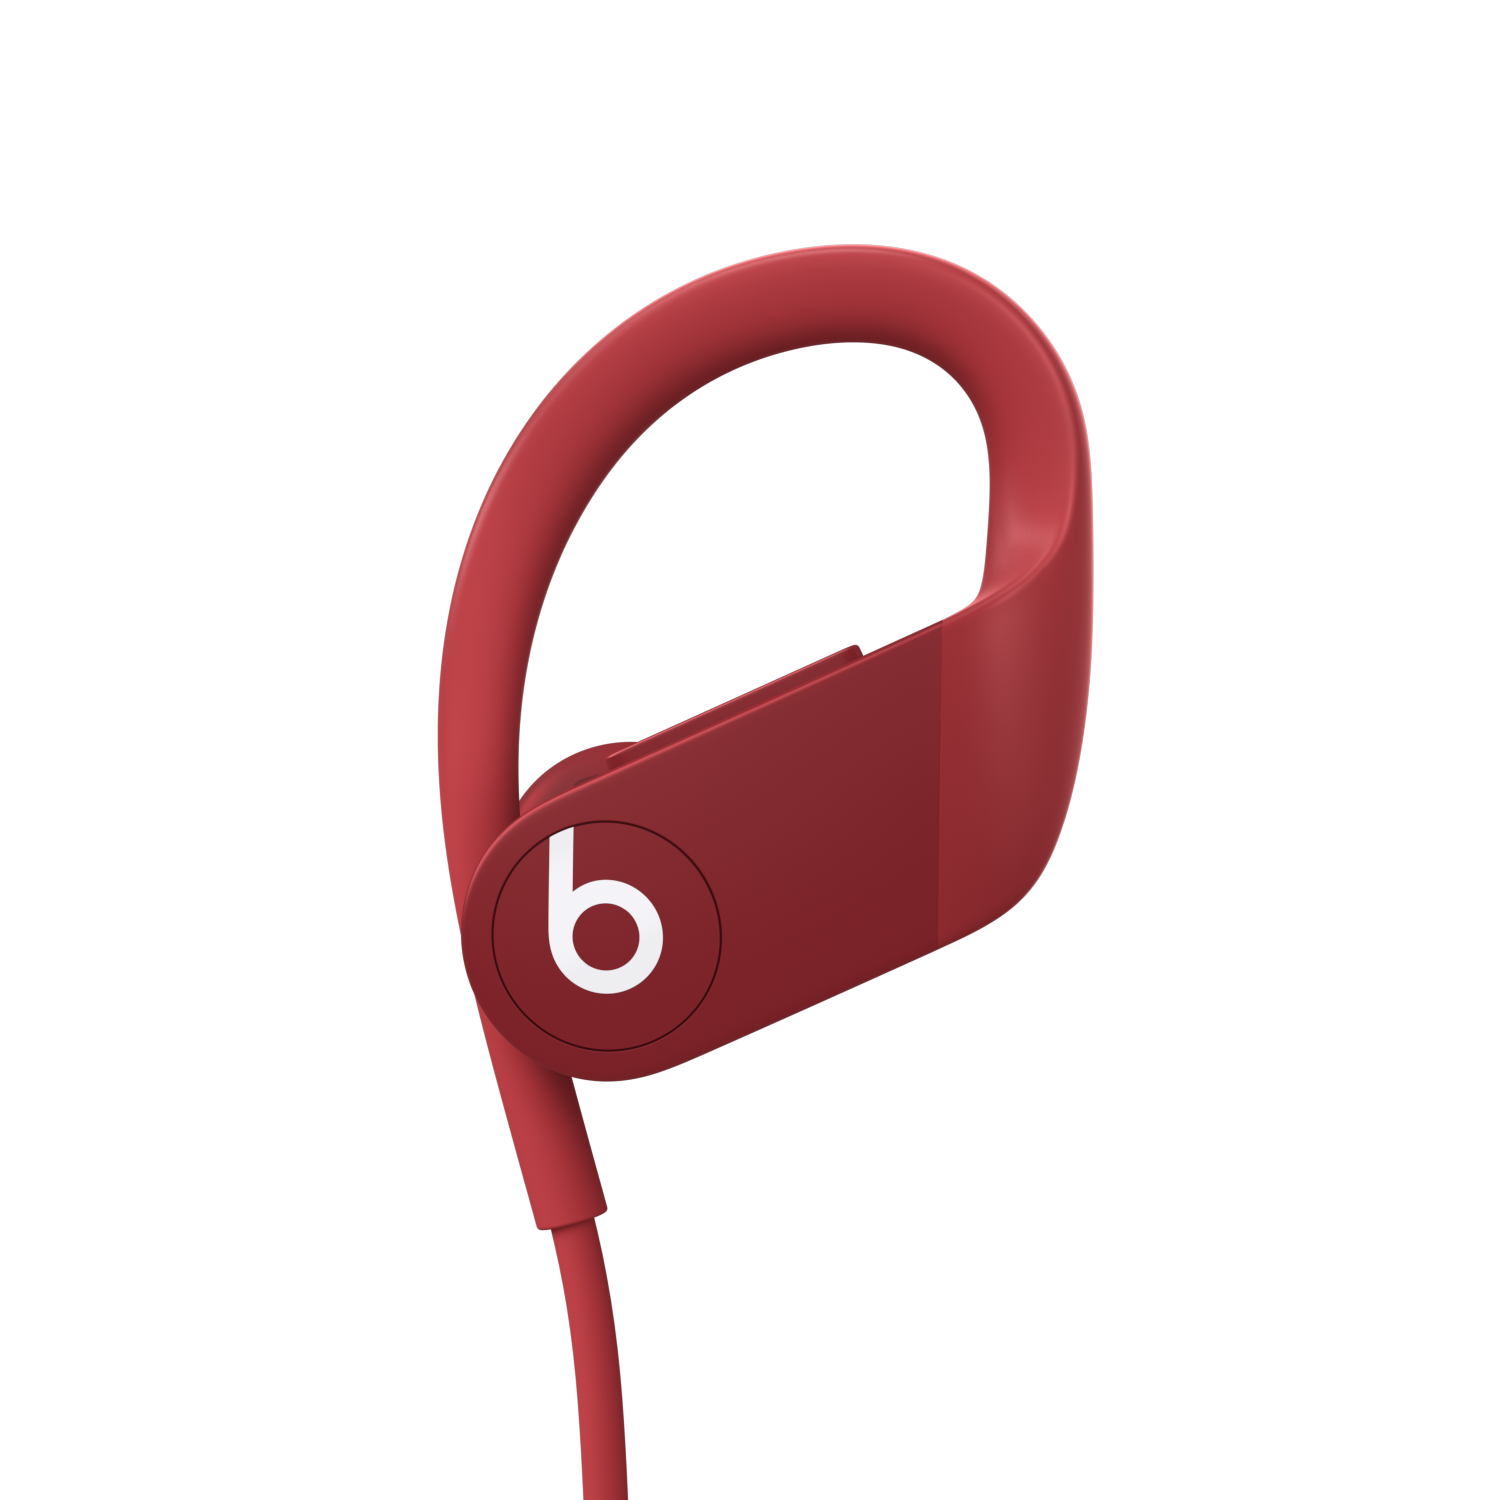 Powerbeats High-Performance Wireless Earphones with Apple H1 Headphone Chip - Red - image 9 of 11